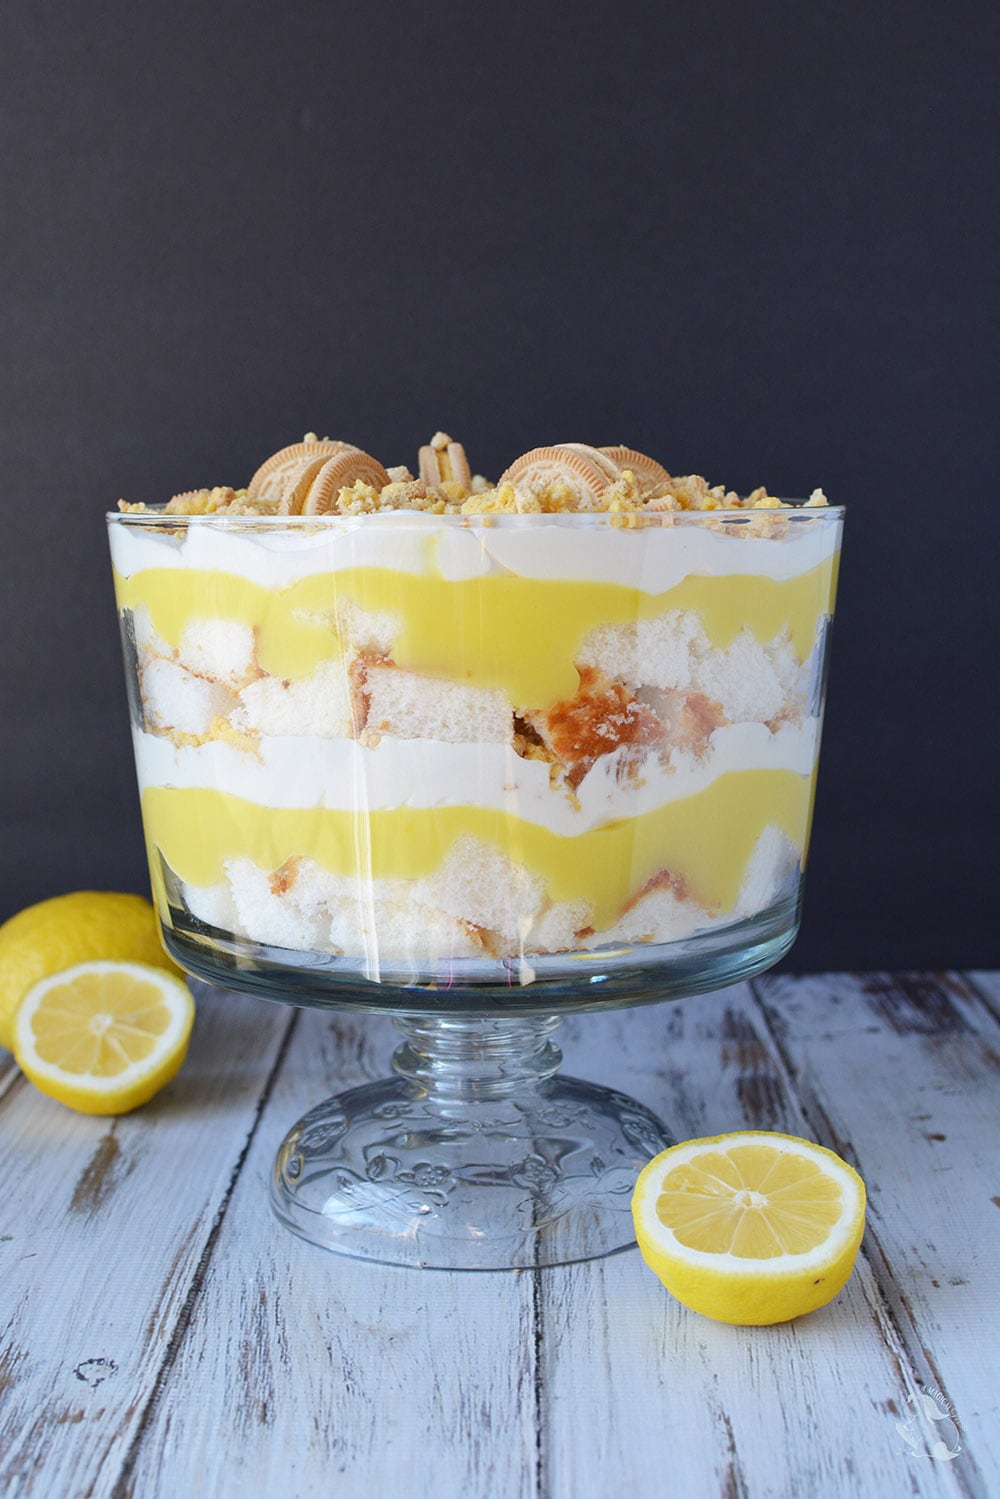 Easy lemon dessert with layers of cake and whipped topping.